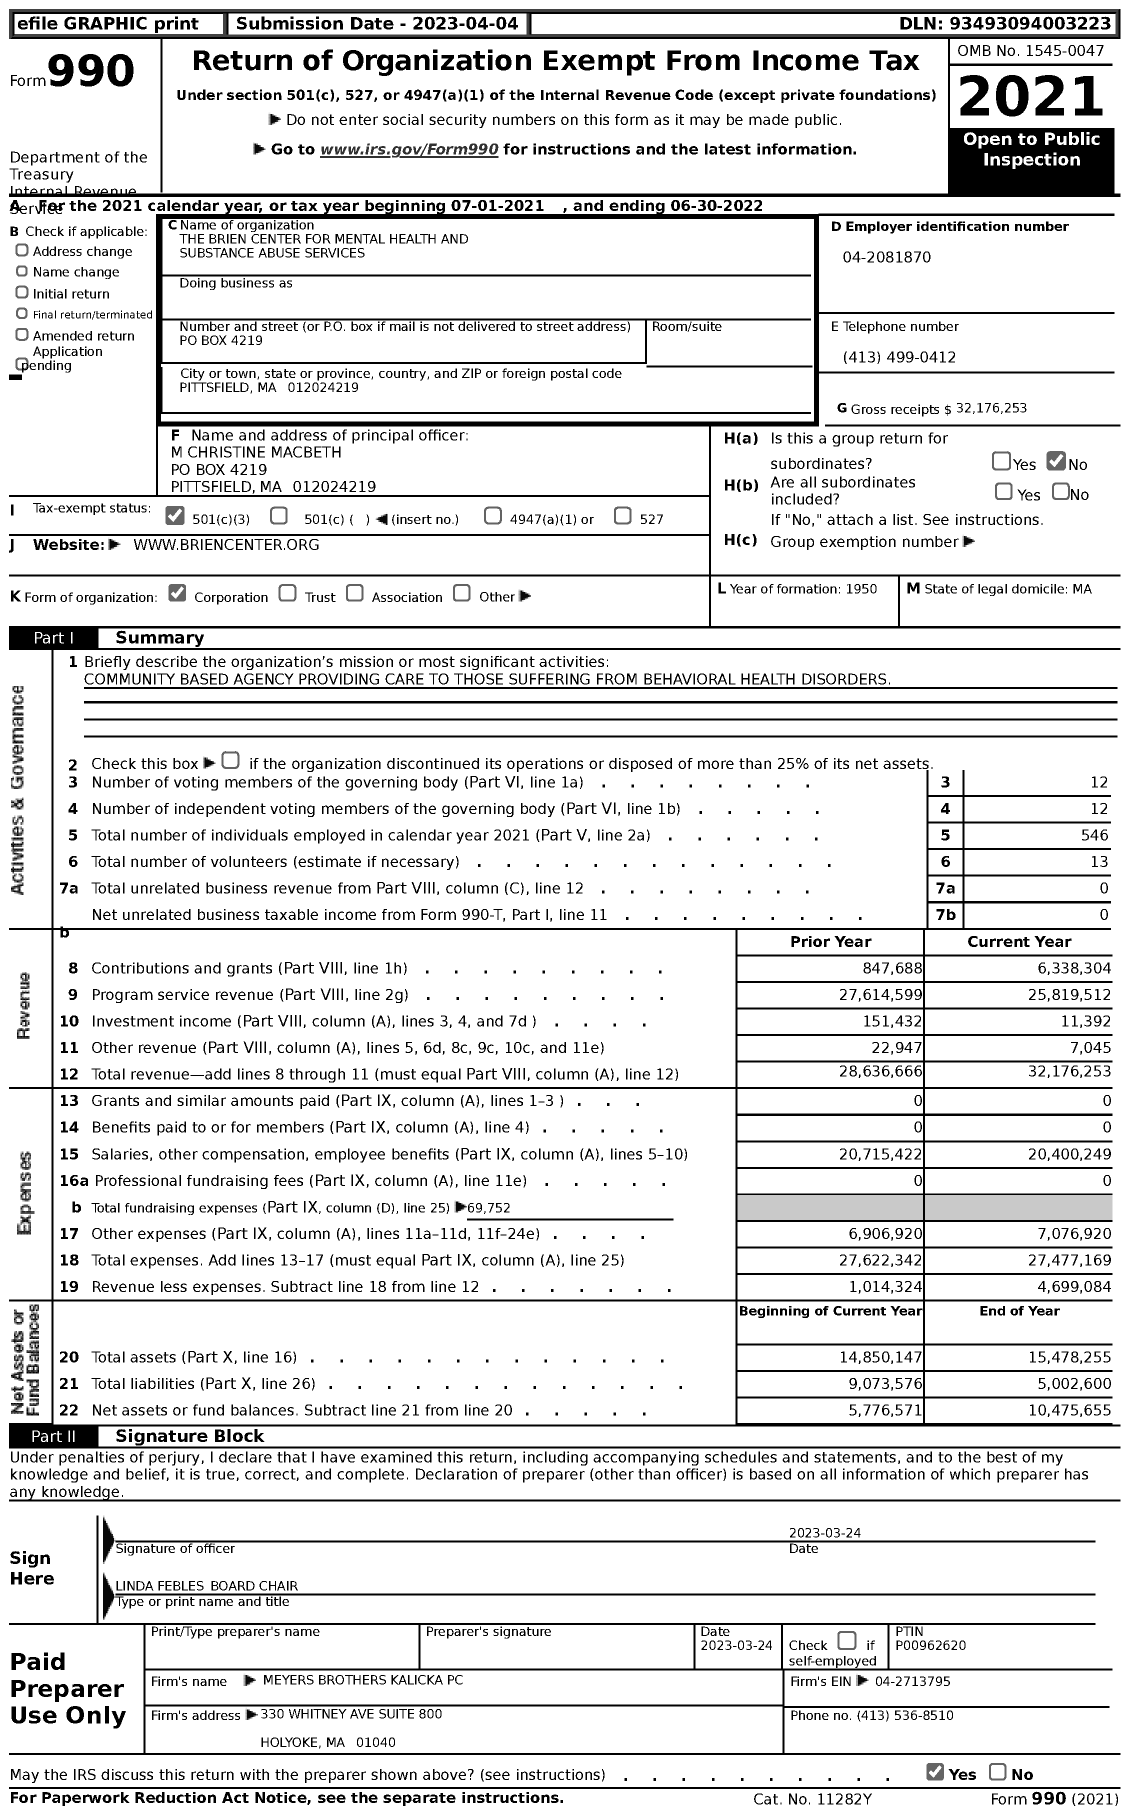 Image of first page of 2021 Form 990 for The Brien Center for Mental Health and Substance Abuse Services